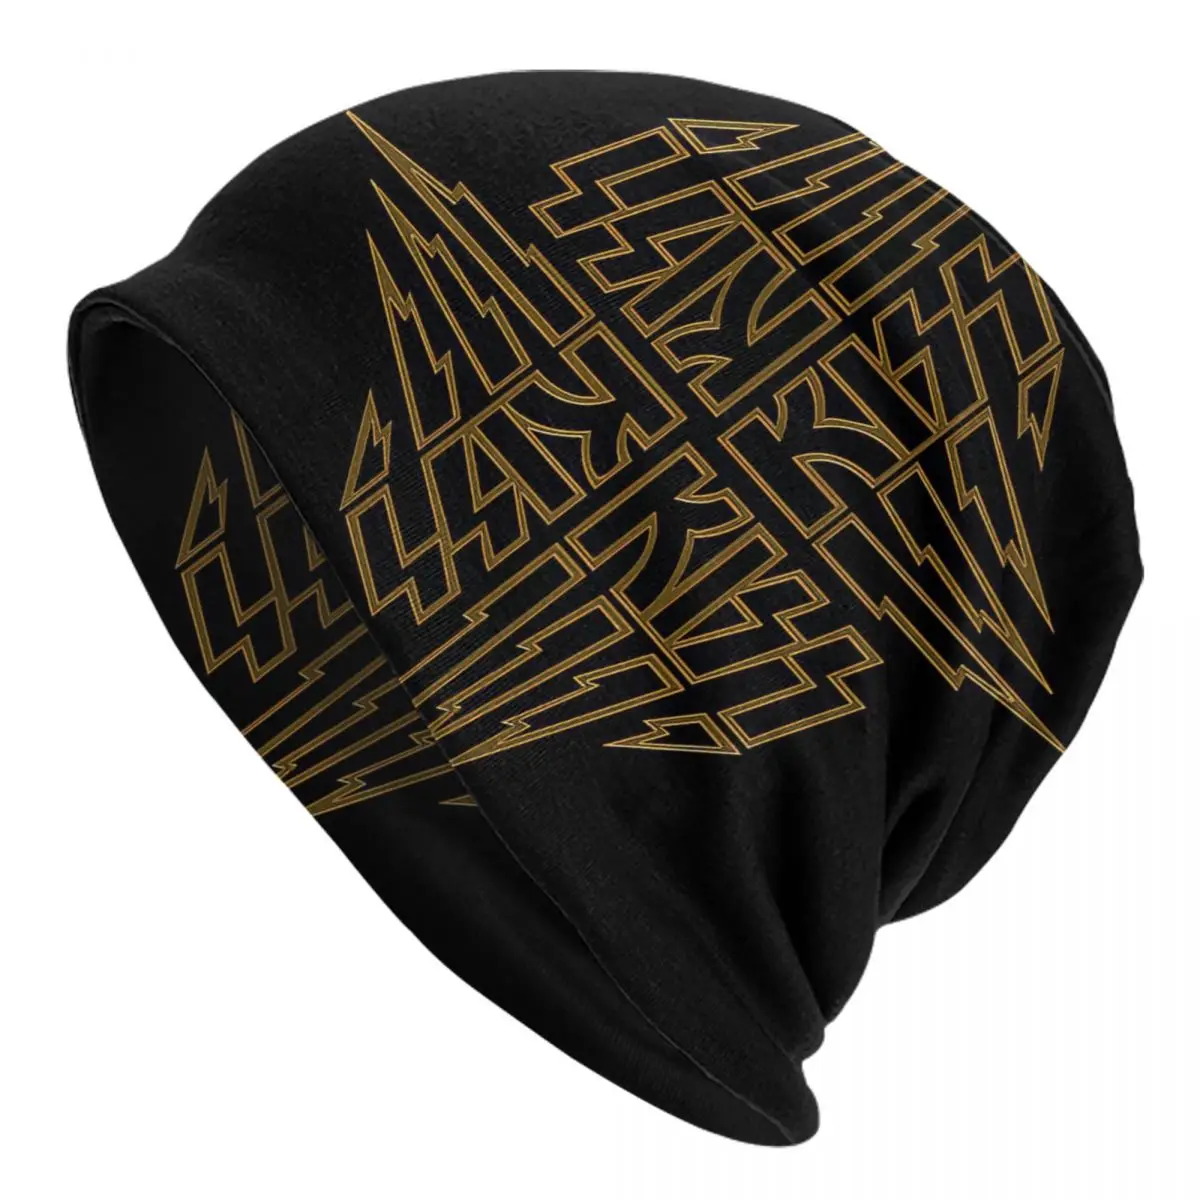 Kiss Band,Kiss Gold Adult Men's Women's Knit Hat Keep warm winter Funny knitted hat